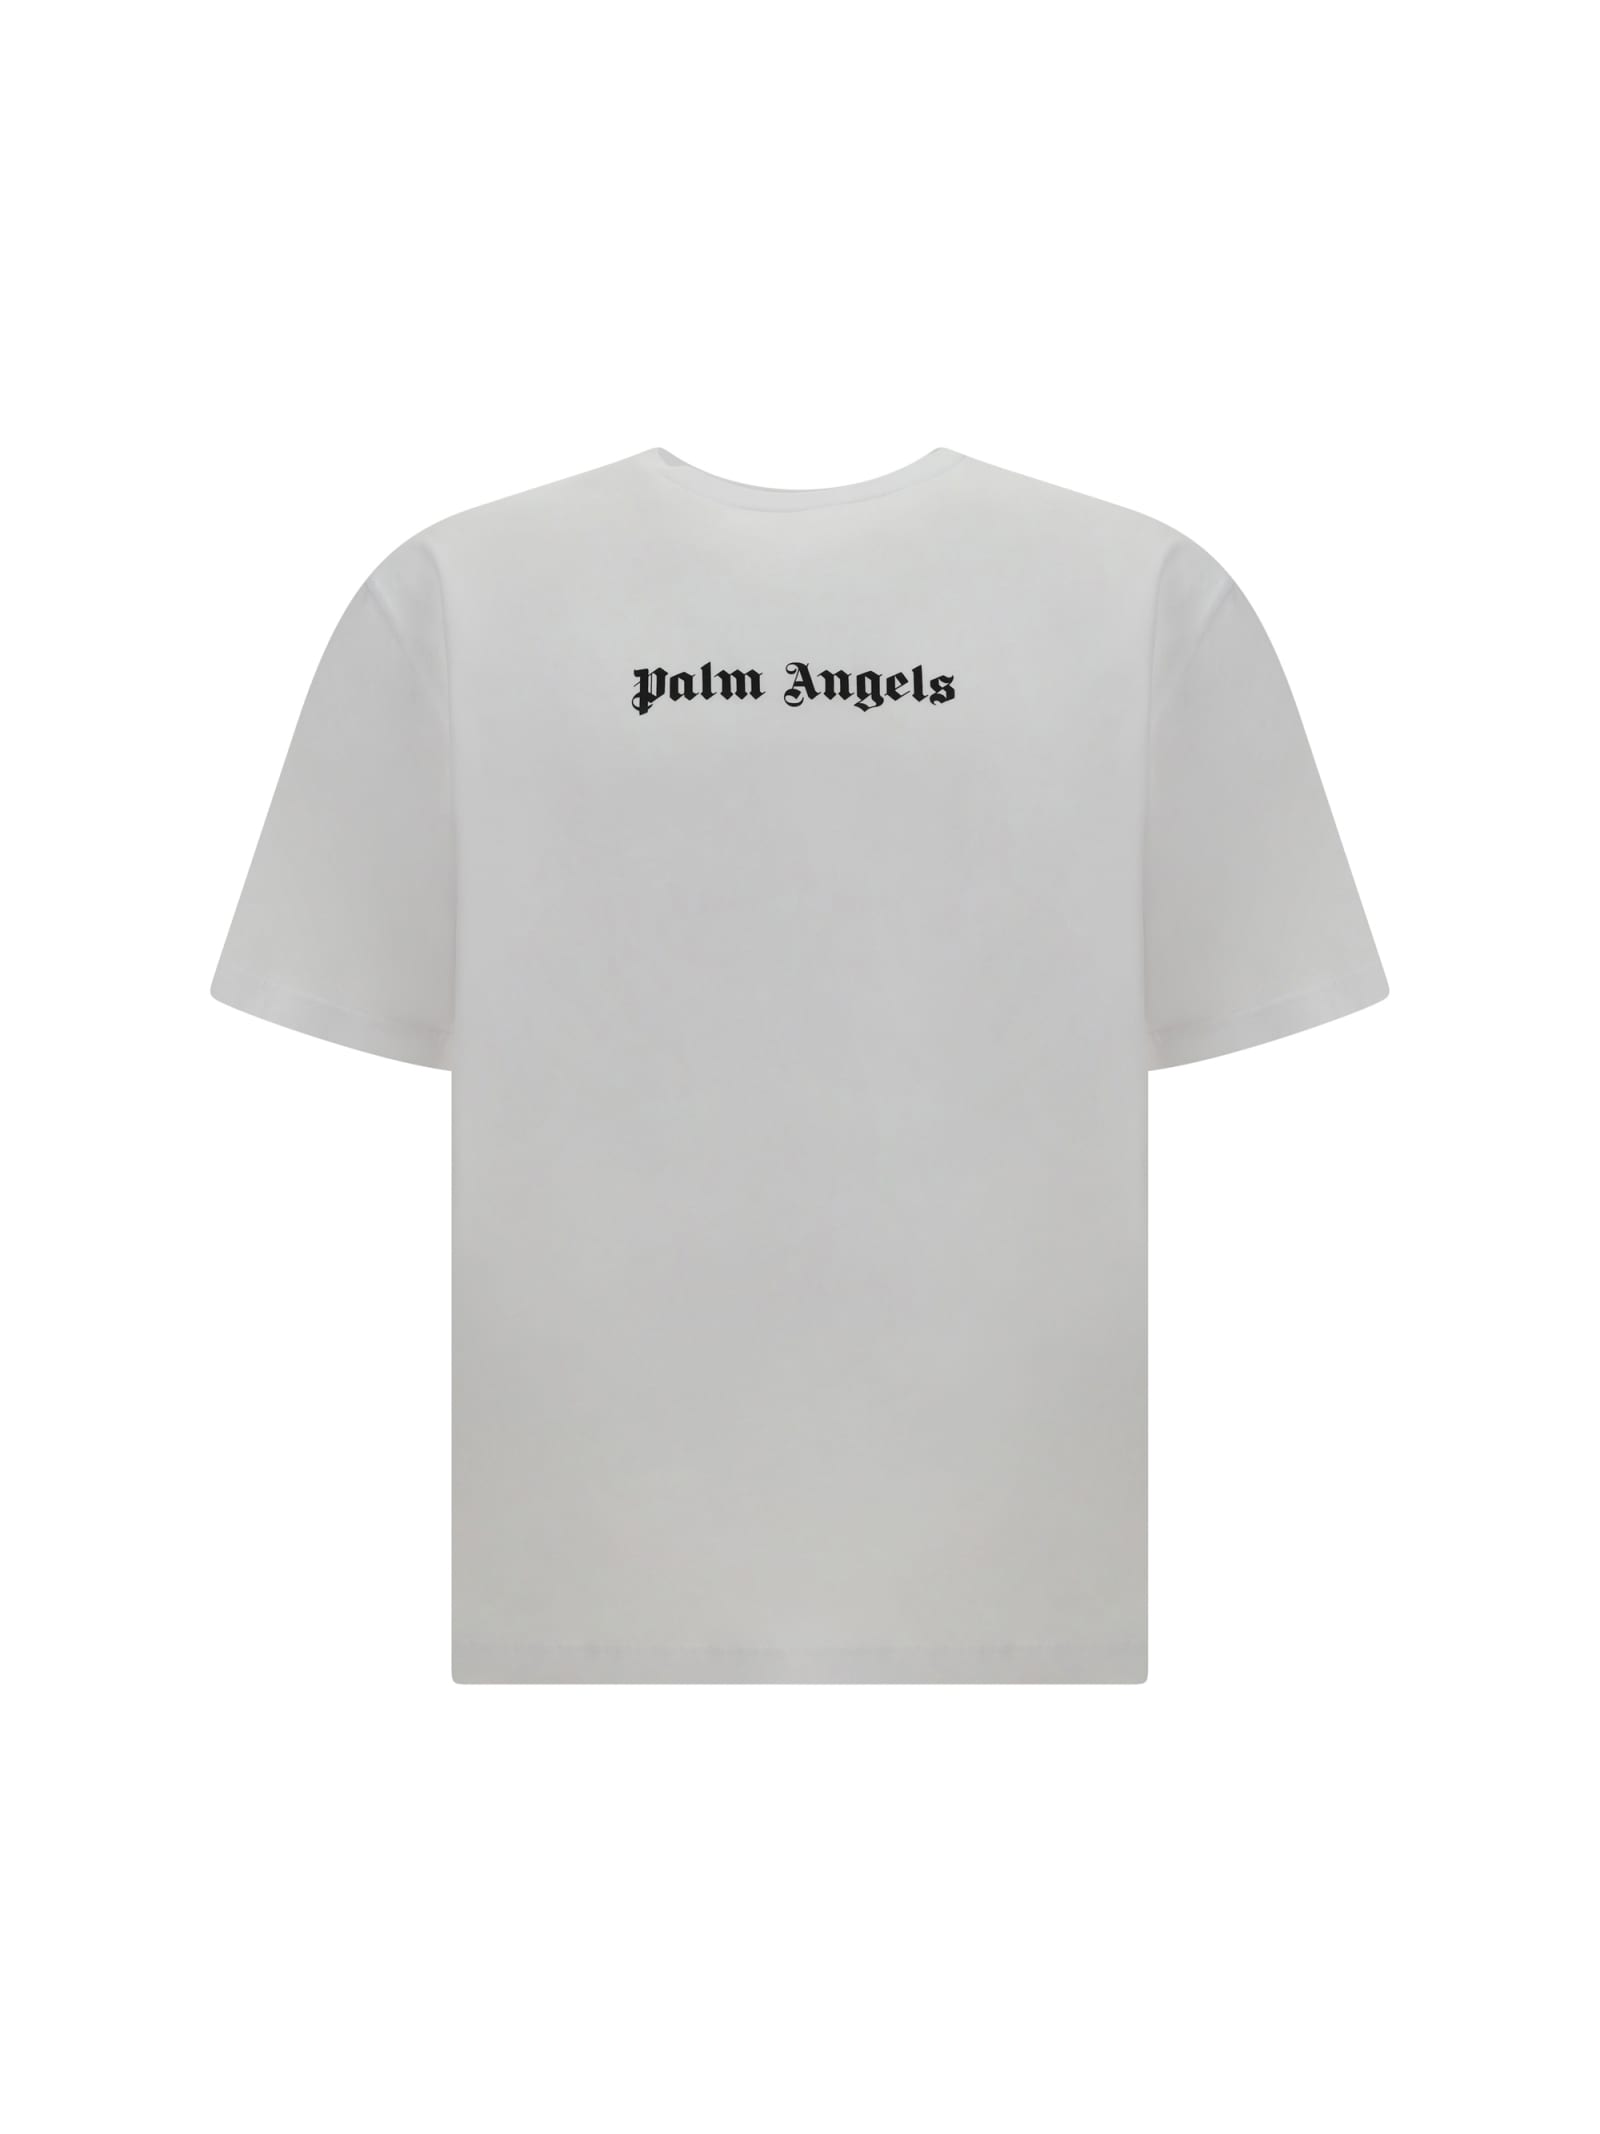 Palm Angels T-shirt In White Black